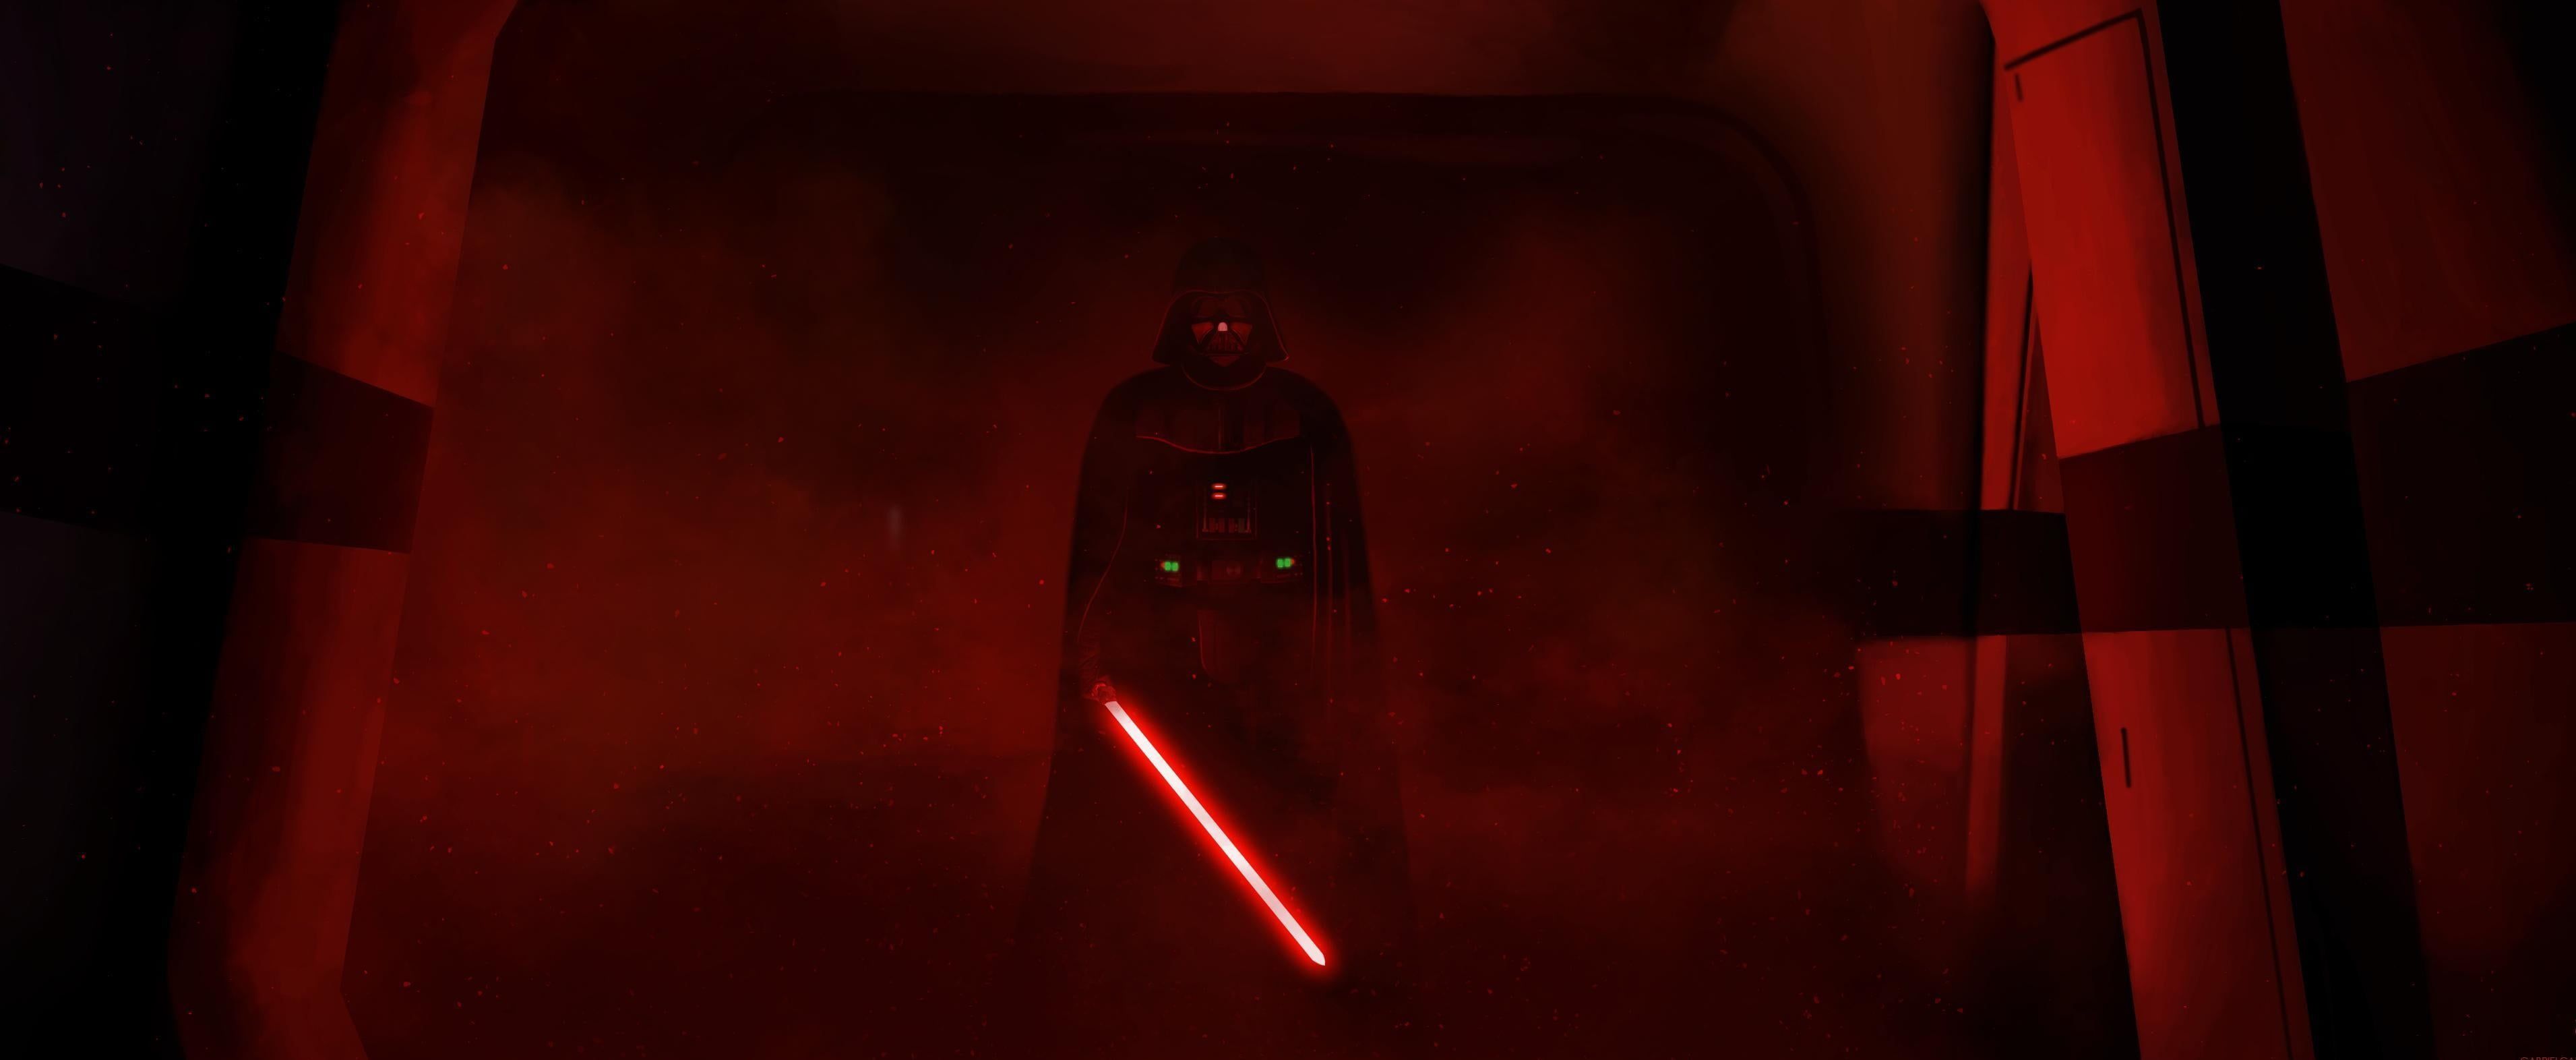 Star Wars #red Darth Vader sith lord #man #sith #pearls #uniform #seifuku #cape the best Rogue One: A Sta. Star wars wallpaper, Darth vader wallpaper, Darth vader